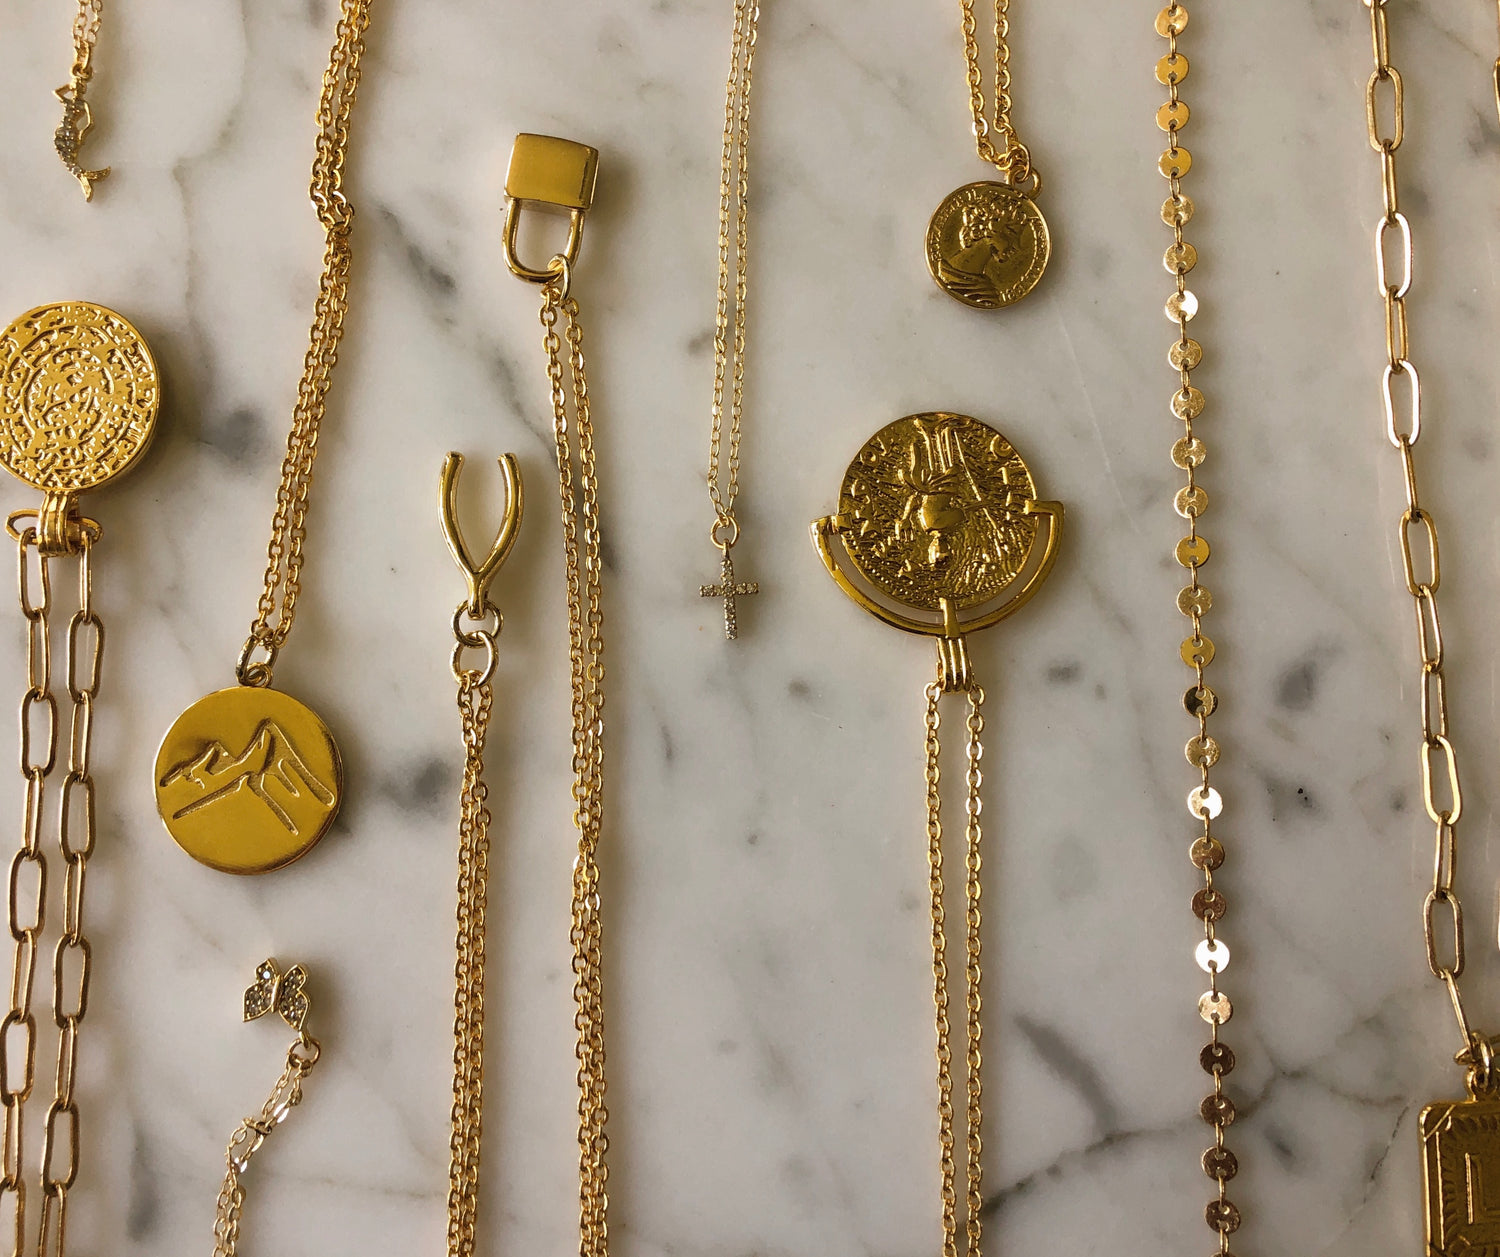 24k gold-plated necklaces